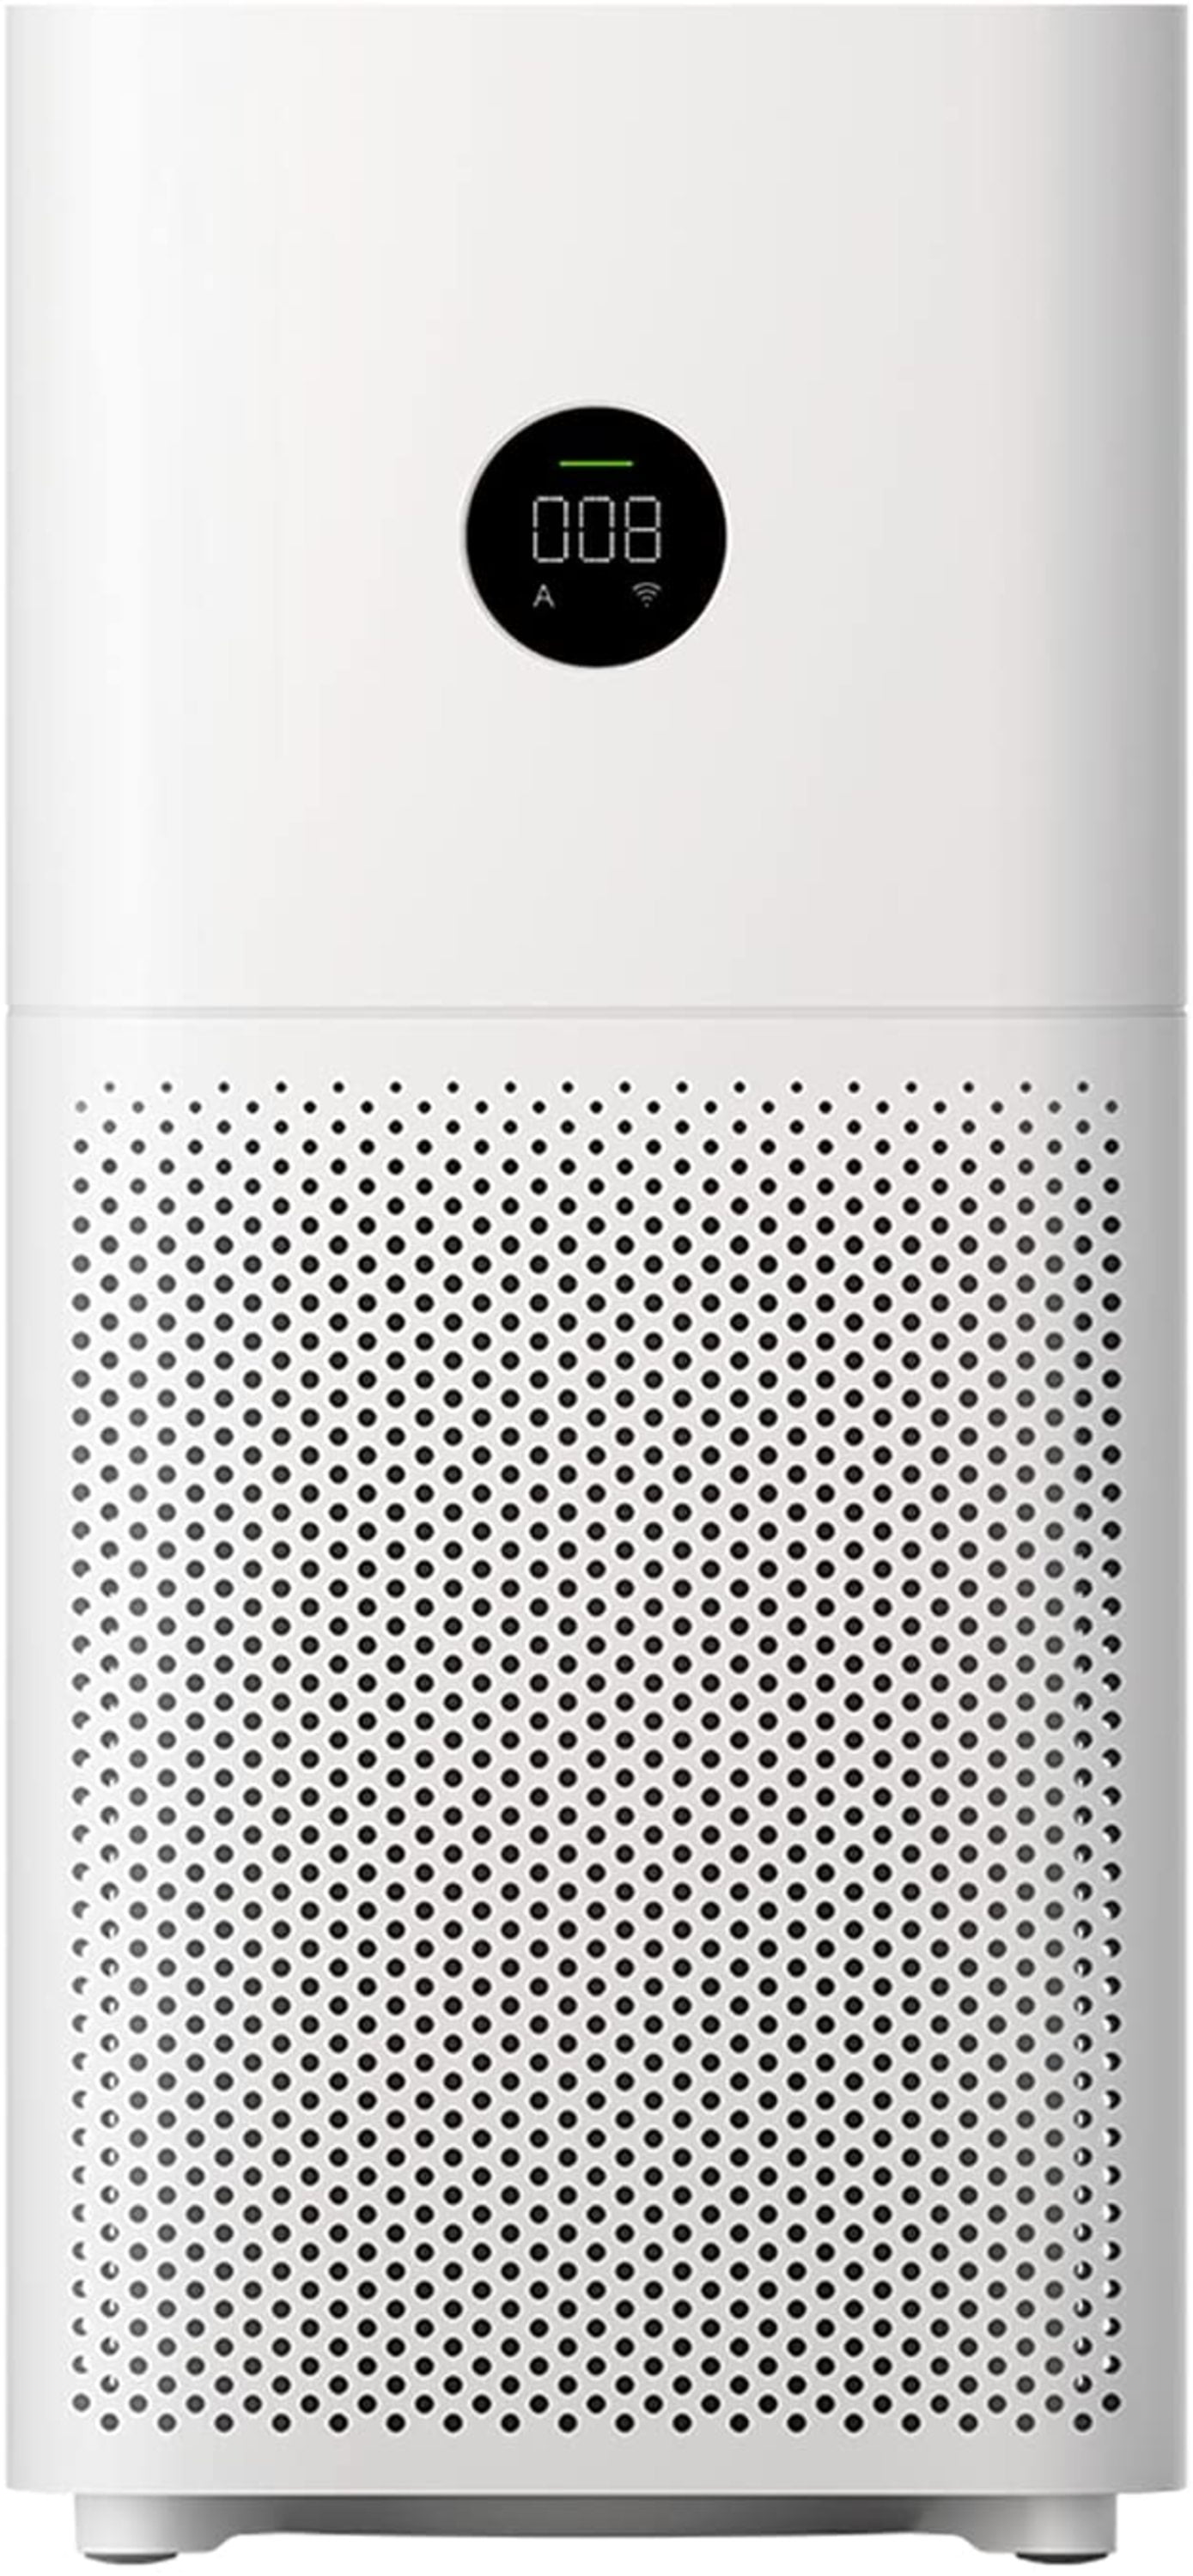  Xiaomi Air Purifiers for Home Bedroom, Allergen Removal, Smart  WiFi Alexa, Large Room Air Purifier Ultra Quiet Auto, PM2.5 Air Quality, HEPA  Filter Cleaner for Pets Hair, Odor, Dust, Smoke, 4Compact